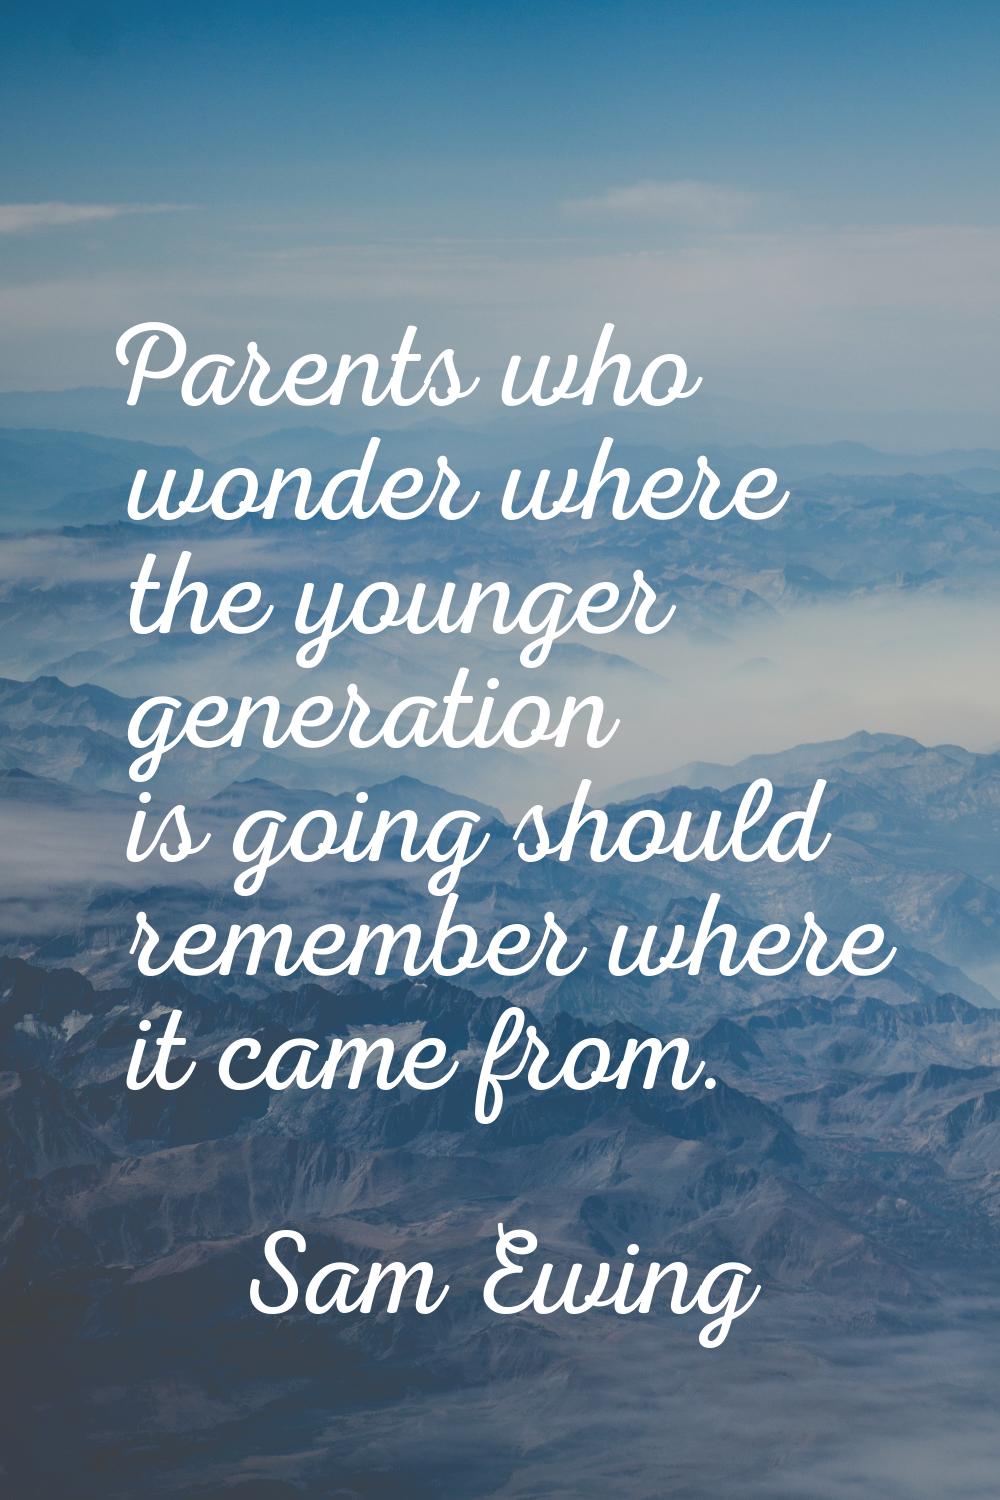 Parents who wonder where the younger generation is going should remember where it came from.